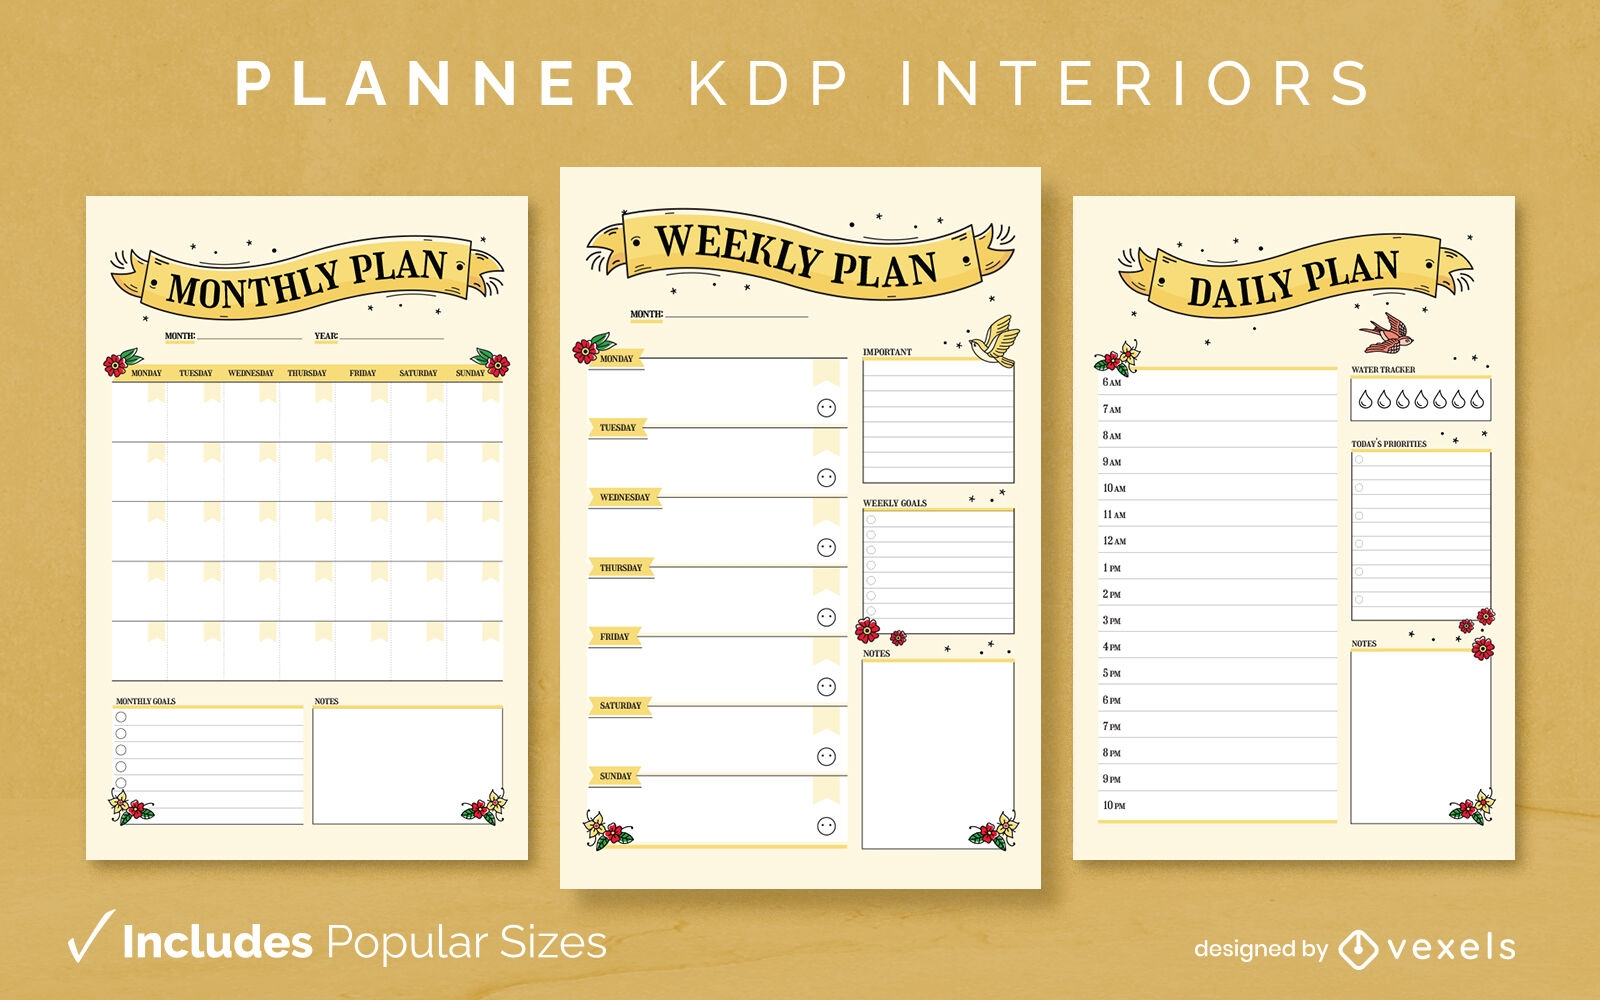 Weekly planner Diary Design Template KDP